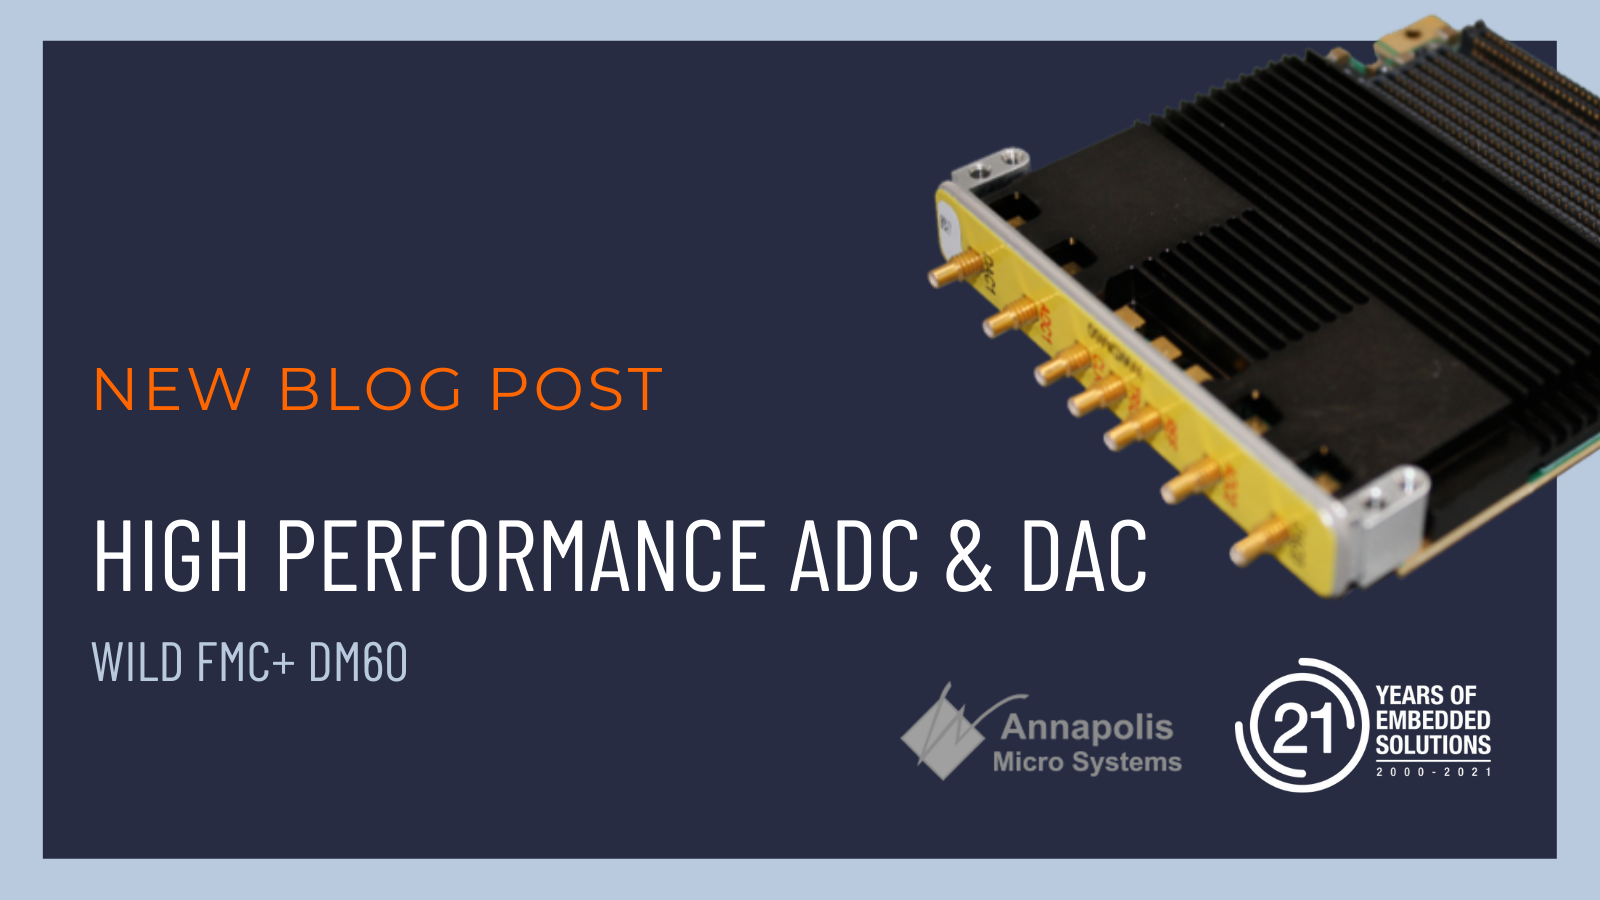 ADC and DAC